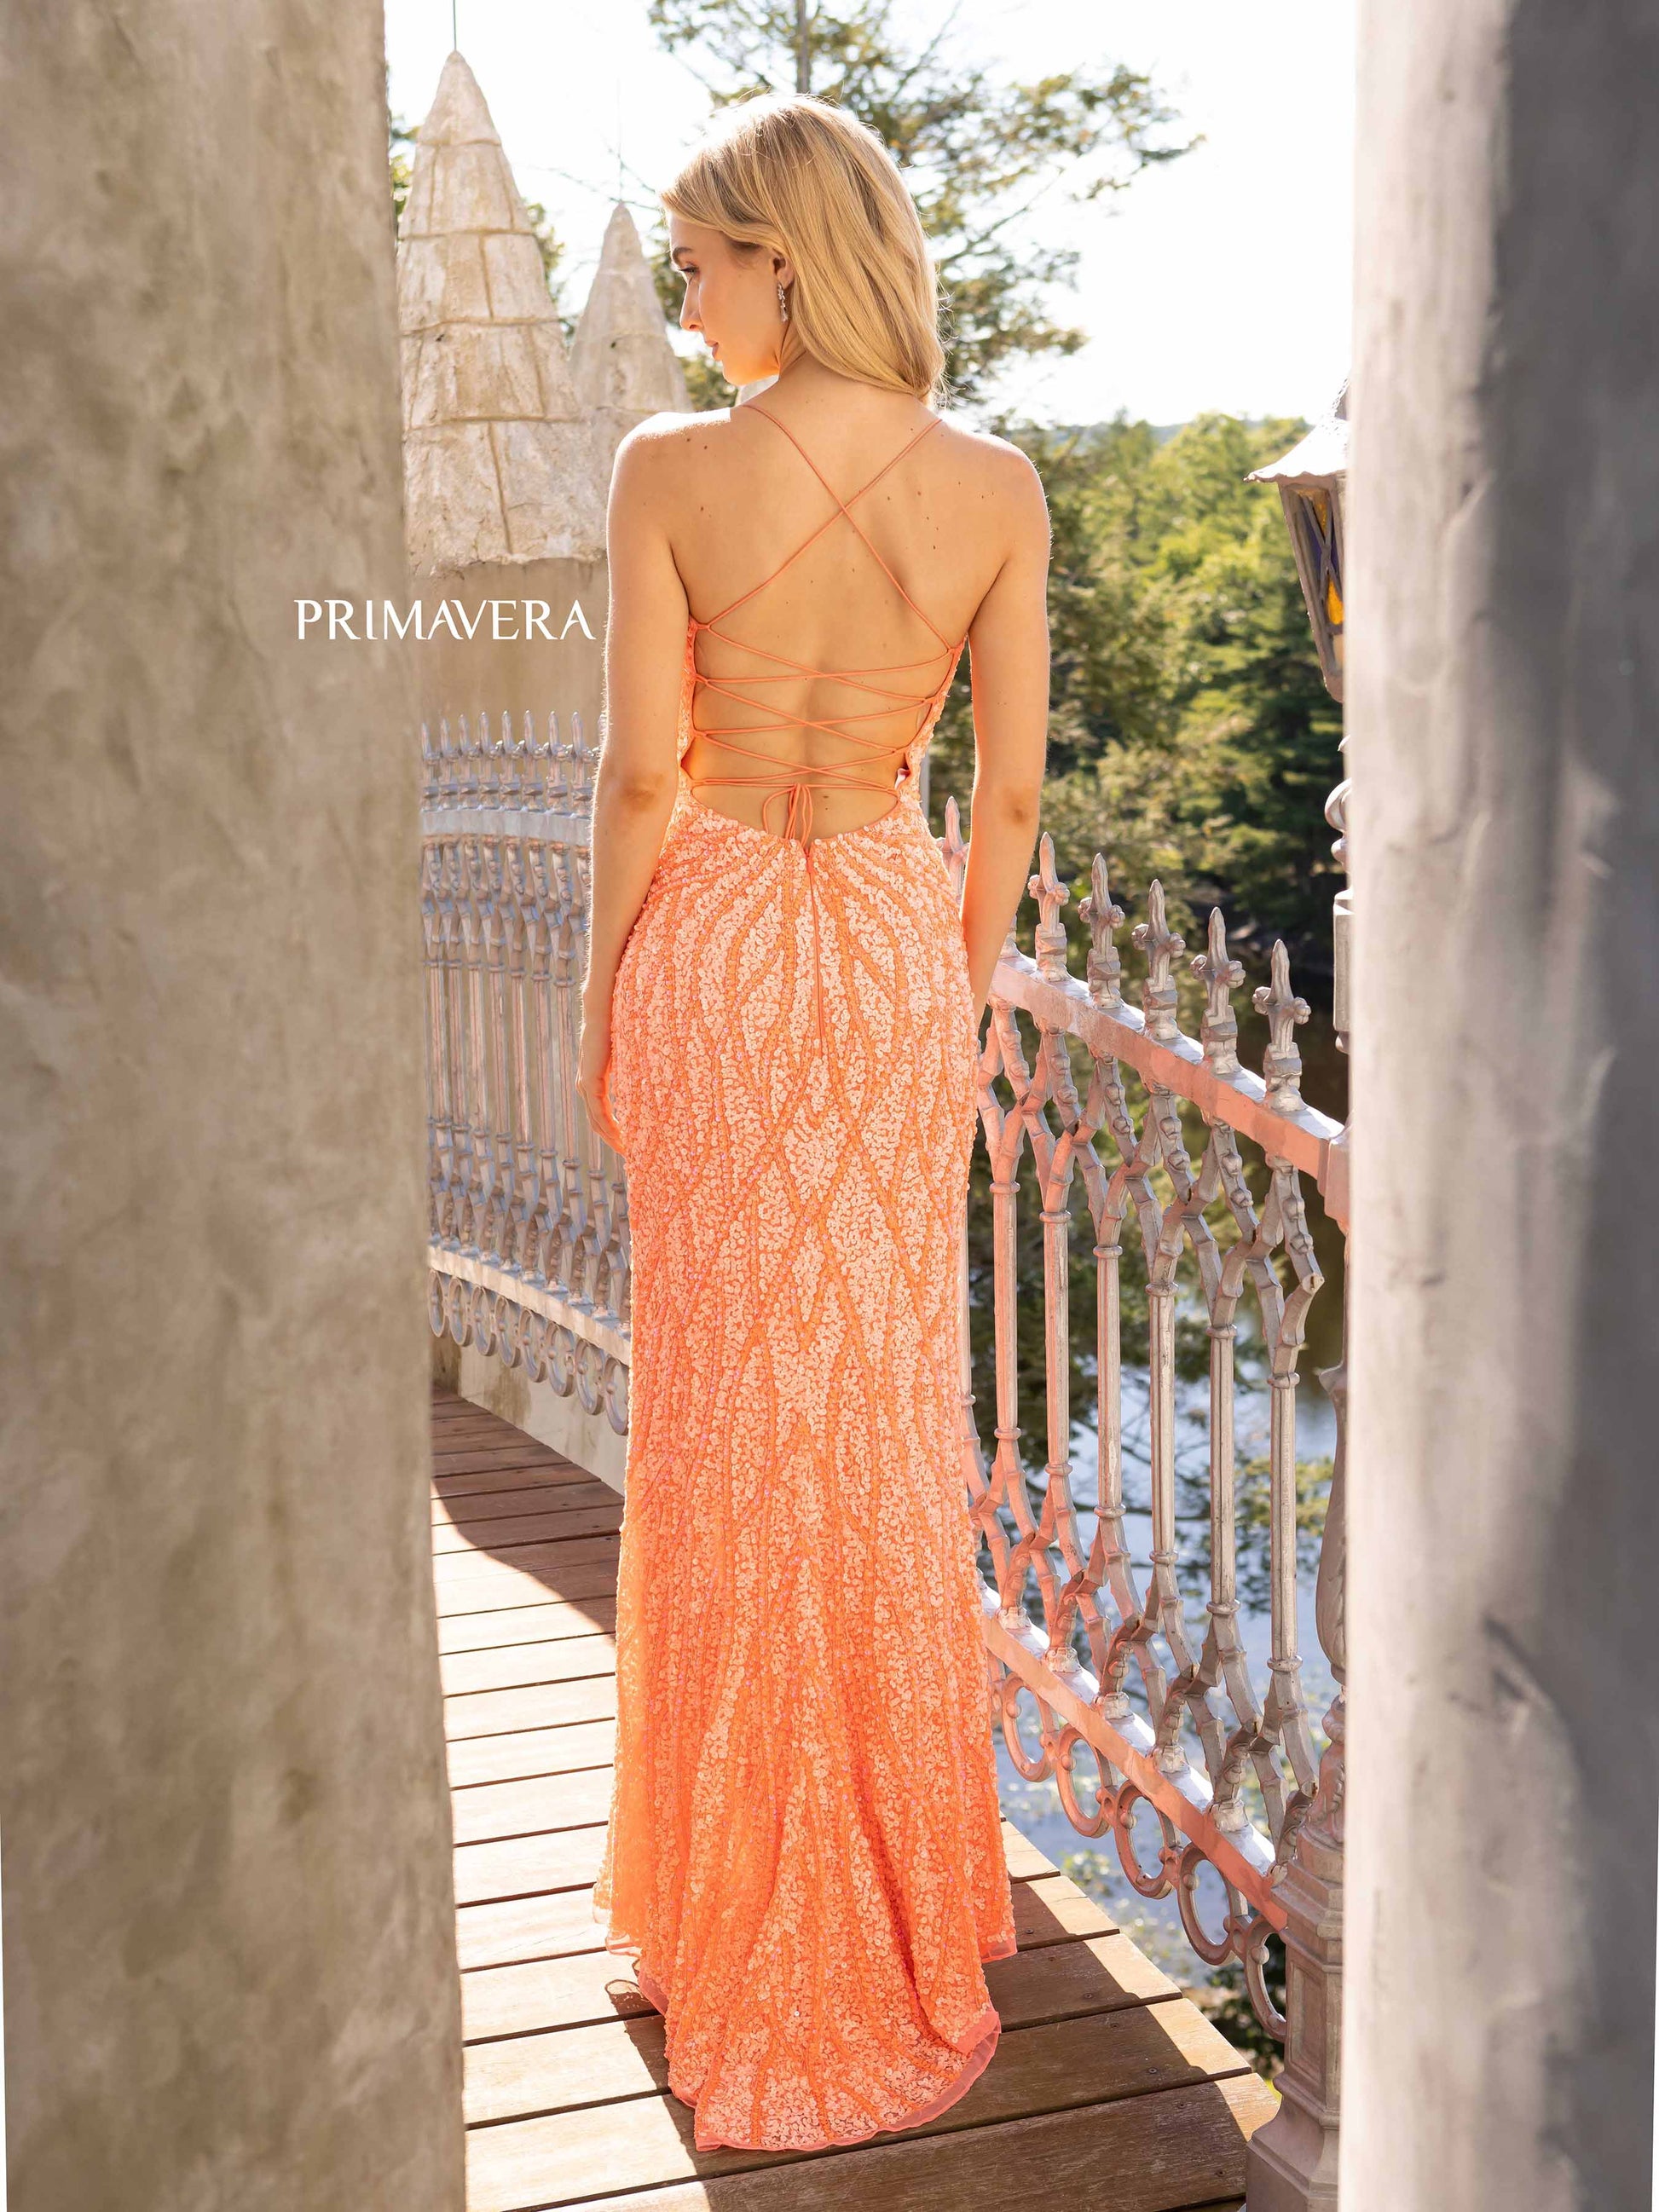 Primavera Couture 3959 This is a coral fully sequined prom dress.  It features a starburst in the front of the dress with waterfall streaming sequins up and down the long length of the dress.  It has a corset open back and a side slit,  Available Size: 2, 10   Available Colors: Coral